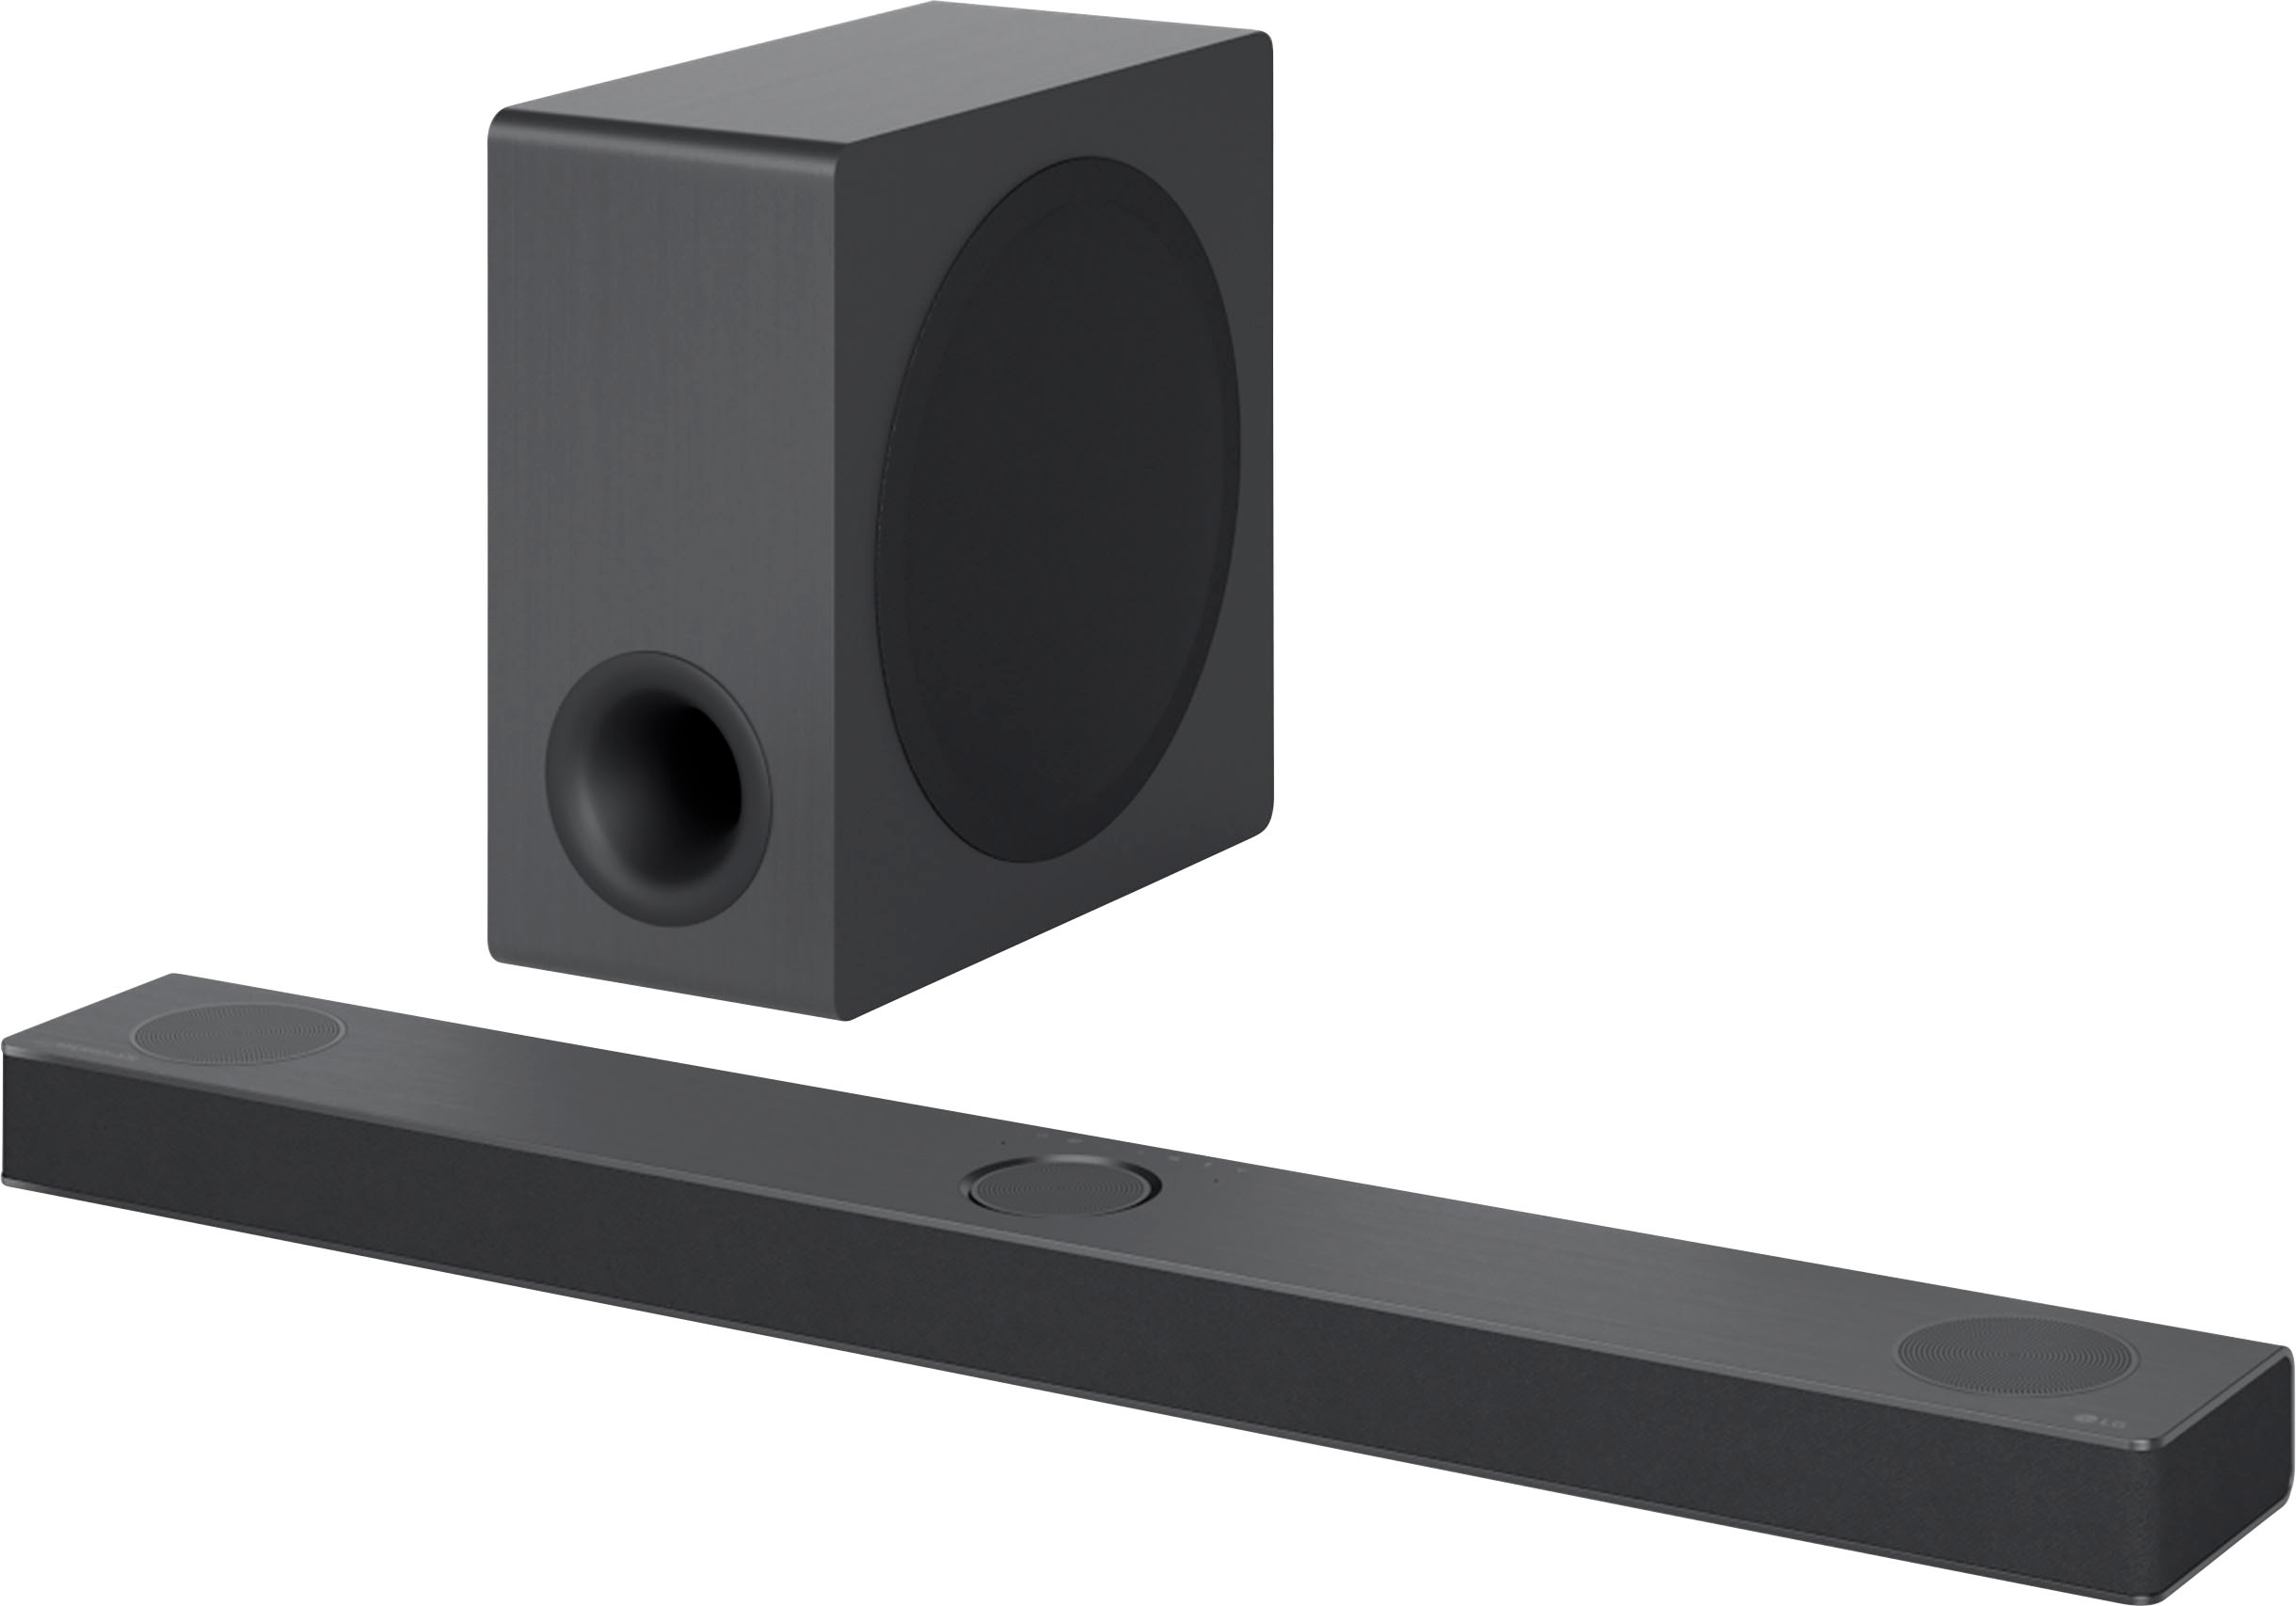 Black with Wireless Soundbar 3.1.3 S80QY and LG DTS:X - Best Channel Dolby Subwoofer, Buy Atmos